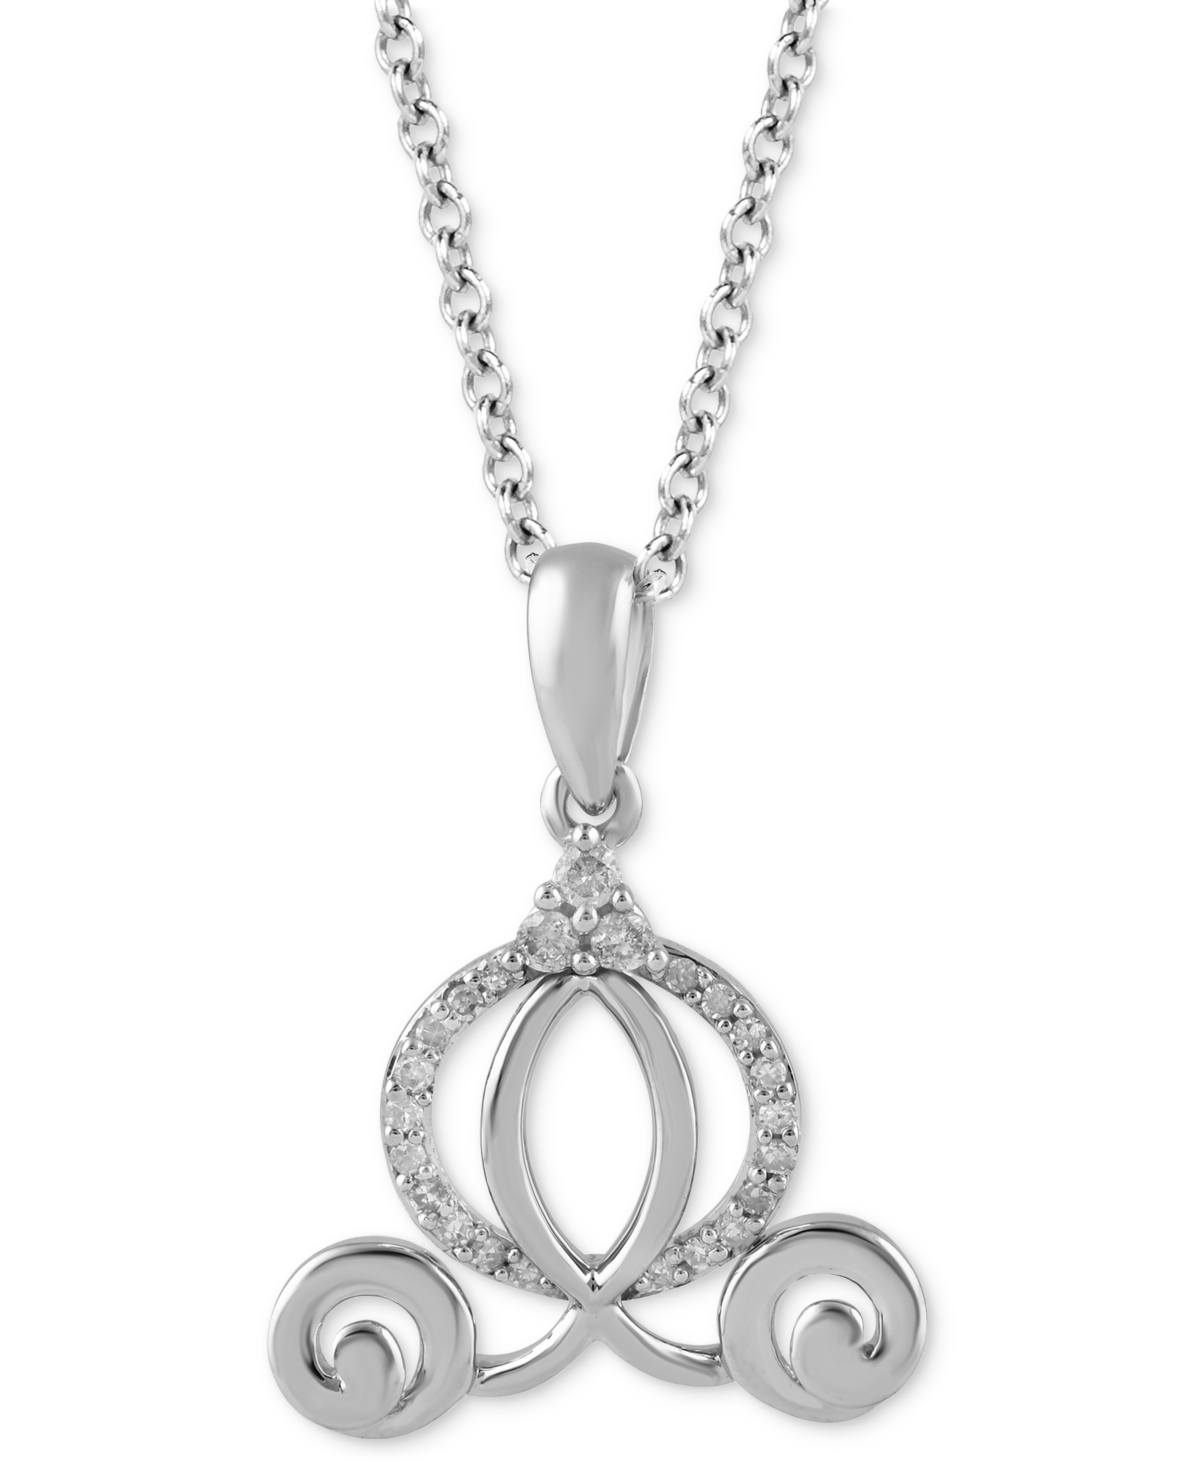 Diamond Cinderella Carriage Pendant Necklace (1/10 ct. t.w.) in Sterling Silver, 16" + 2" extender - Sterling Silver